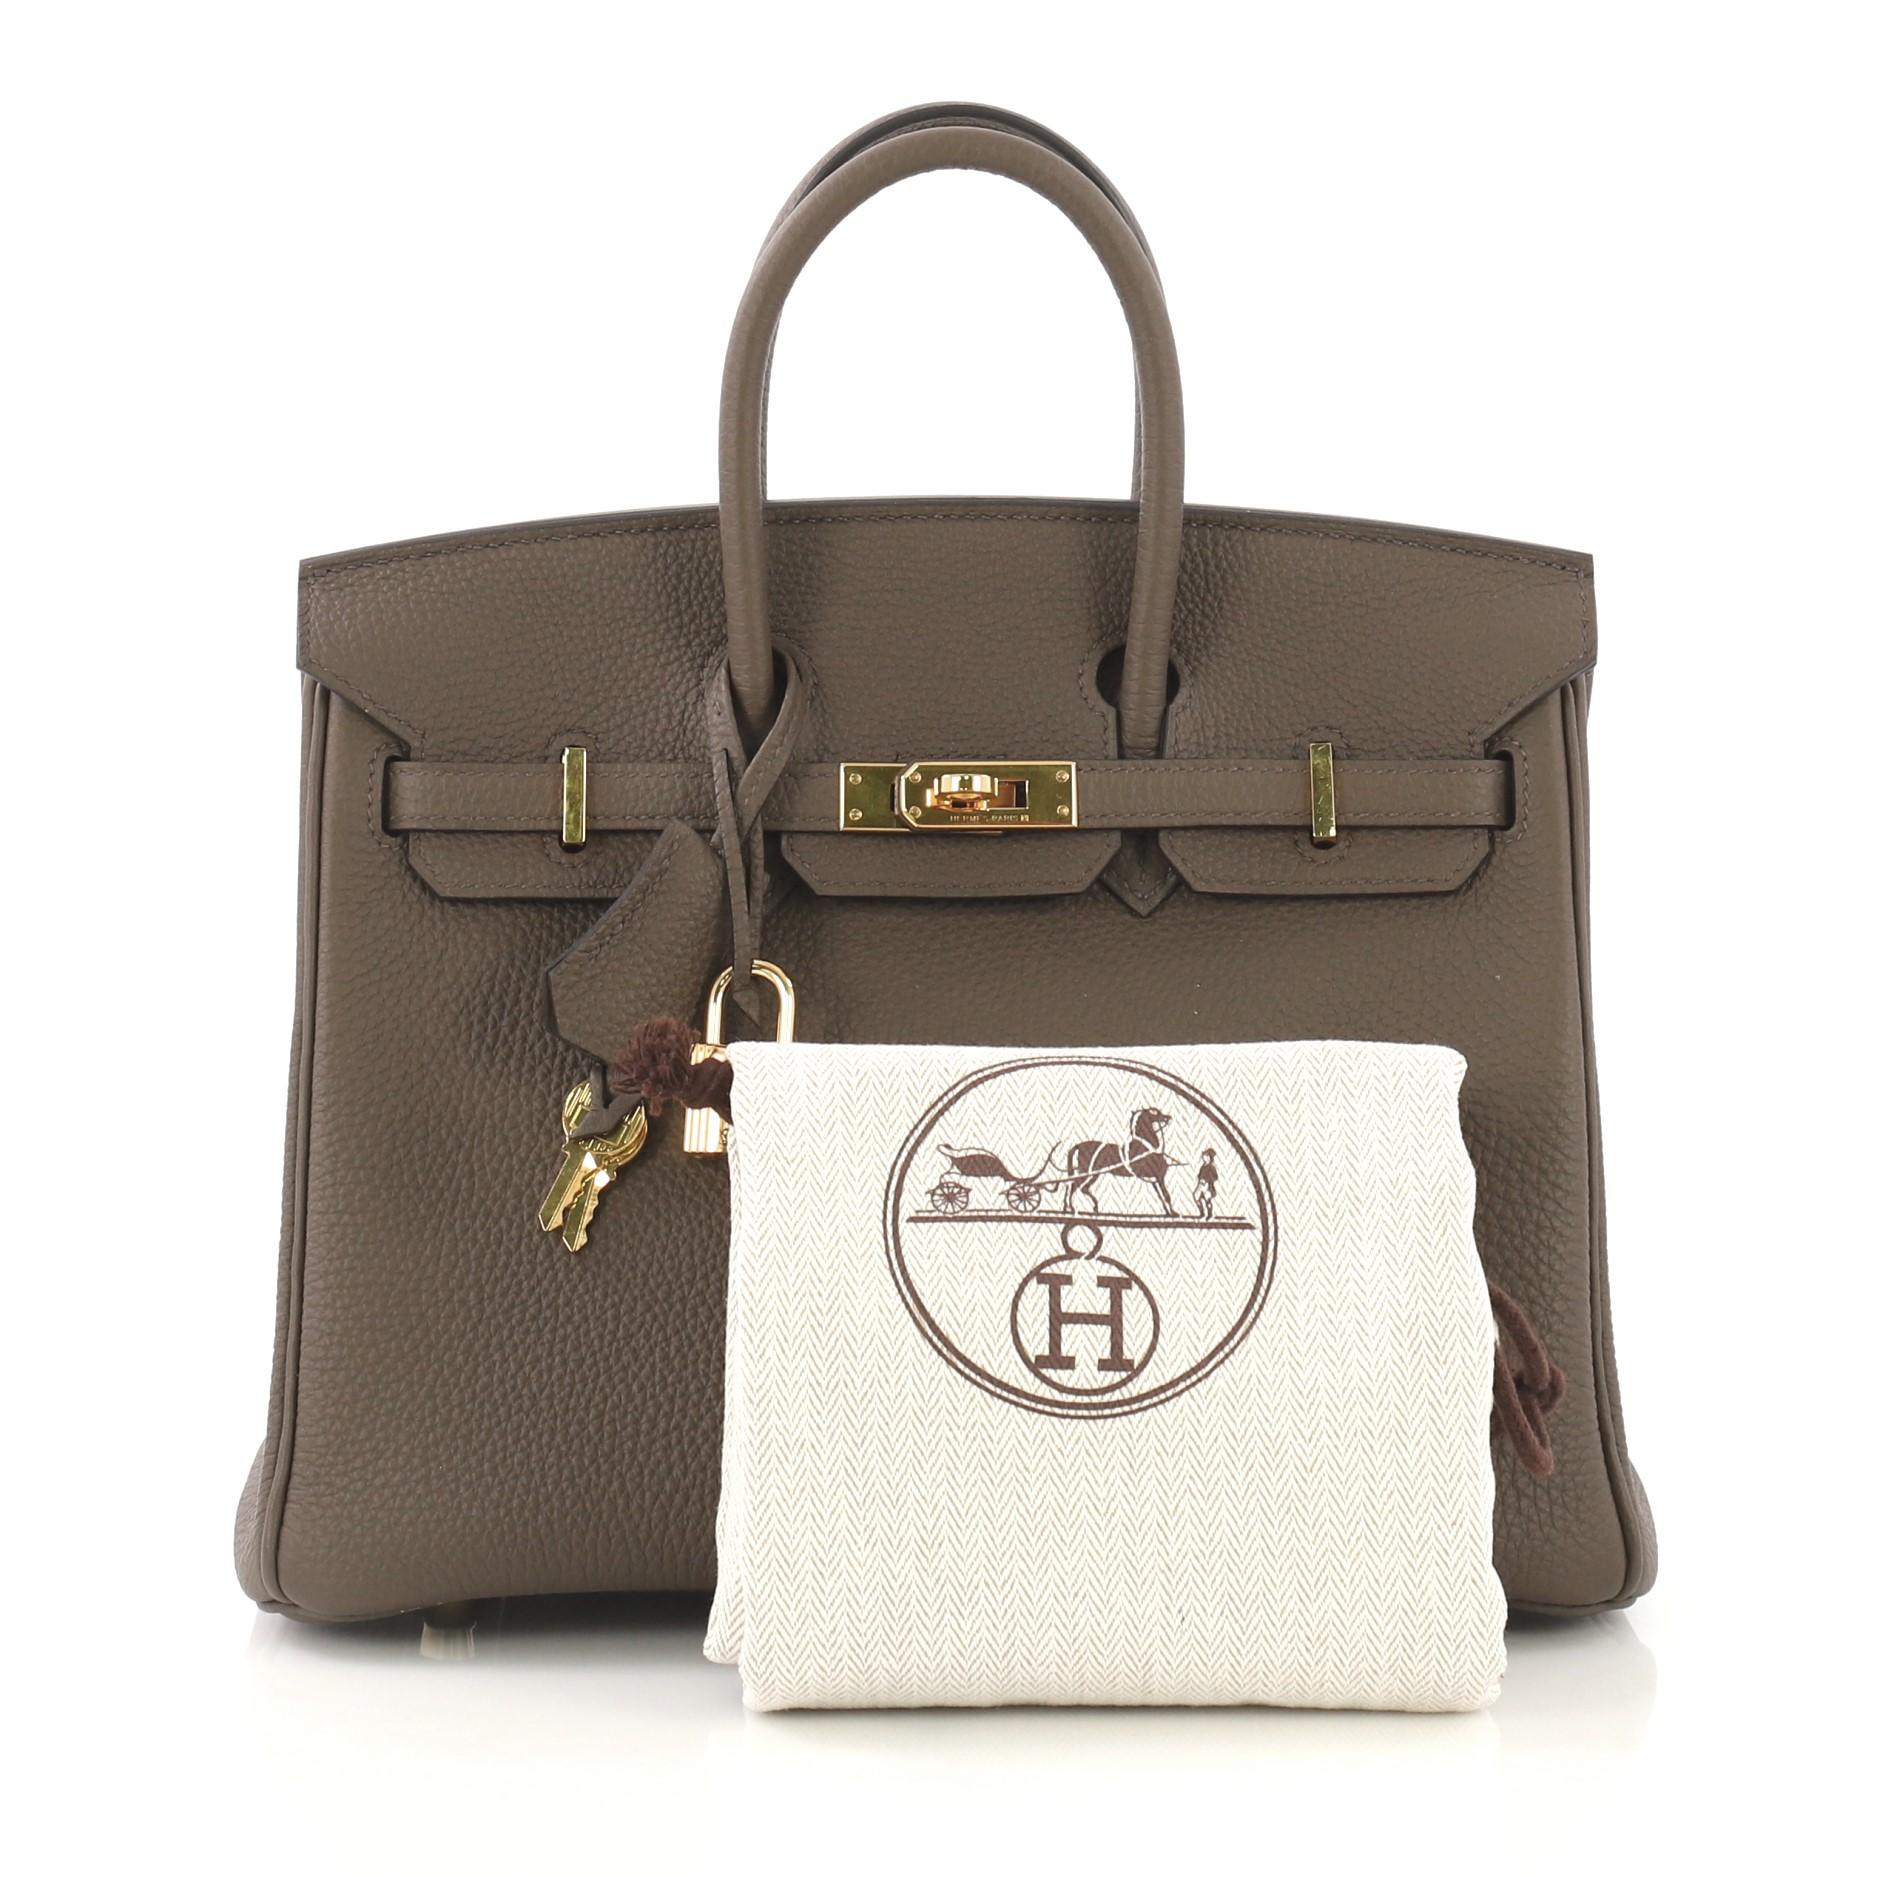 This Hermes Birkin Handbag Taupe Togo with Gold Hardware 25, crafted in Taupe Togo leather, features dual rolled handles, frontal flap, and gold hardware. Its turn-lock closure opens to a Taupe Chevre leather interior with a slip pocket. Date stamp